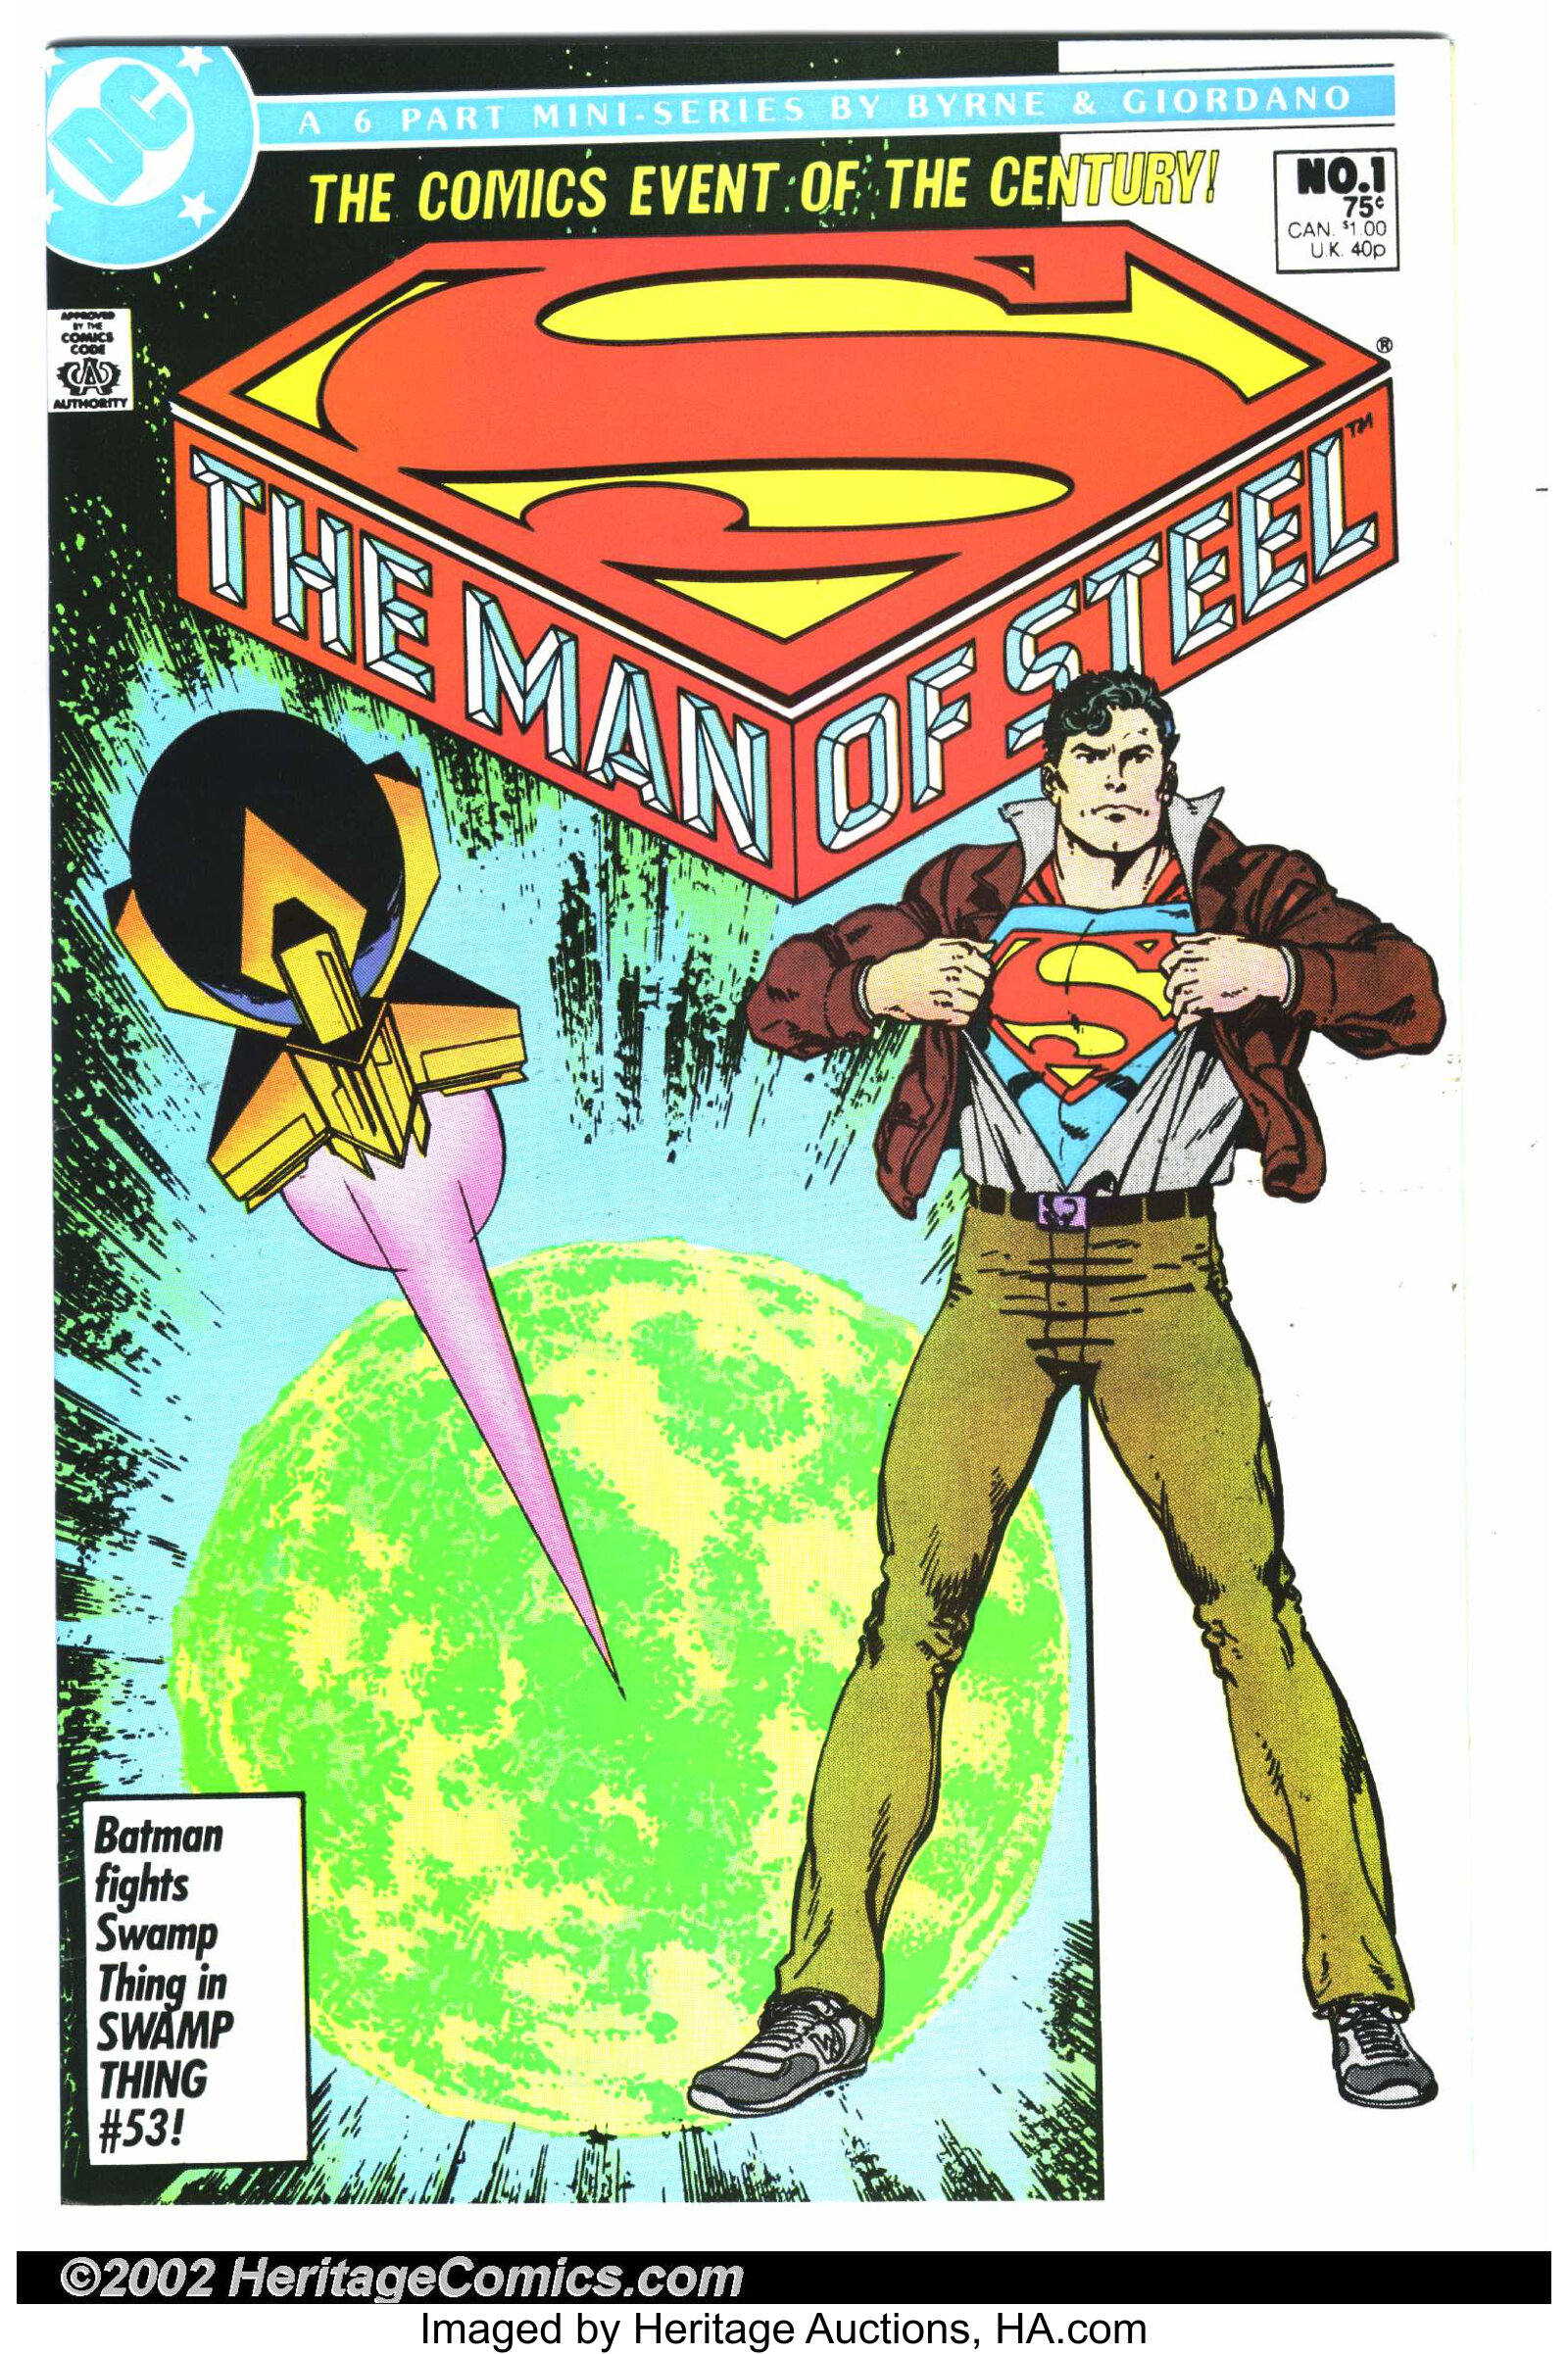 The Man of Steel (1986—1986), DC Database